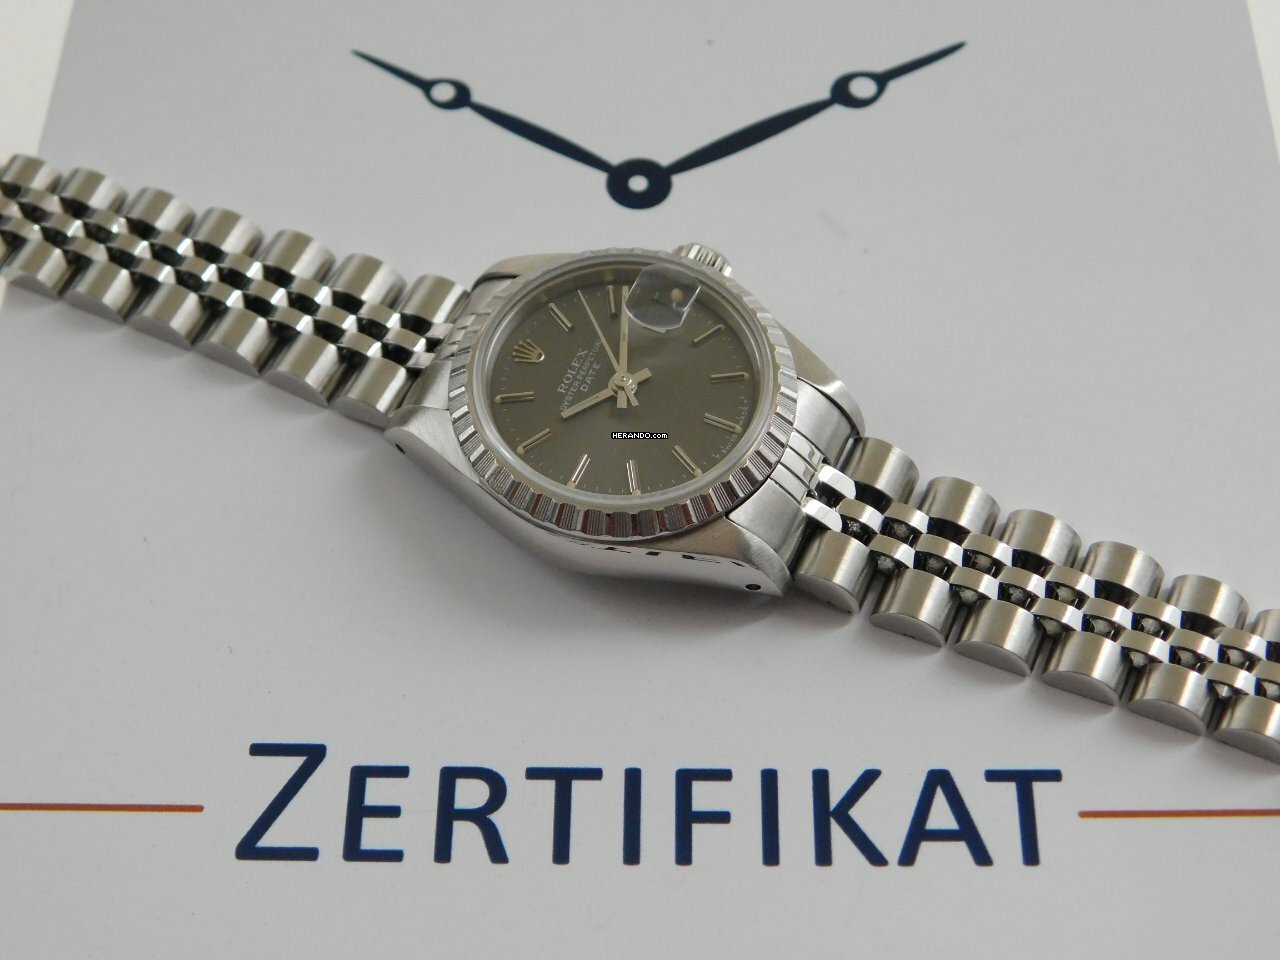 watches-312768-26630235-9e21t8vlox155w0wf8vgxmko-ExtraLarge.jpg